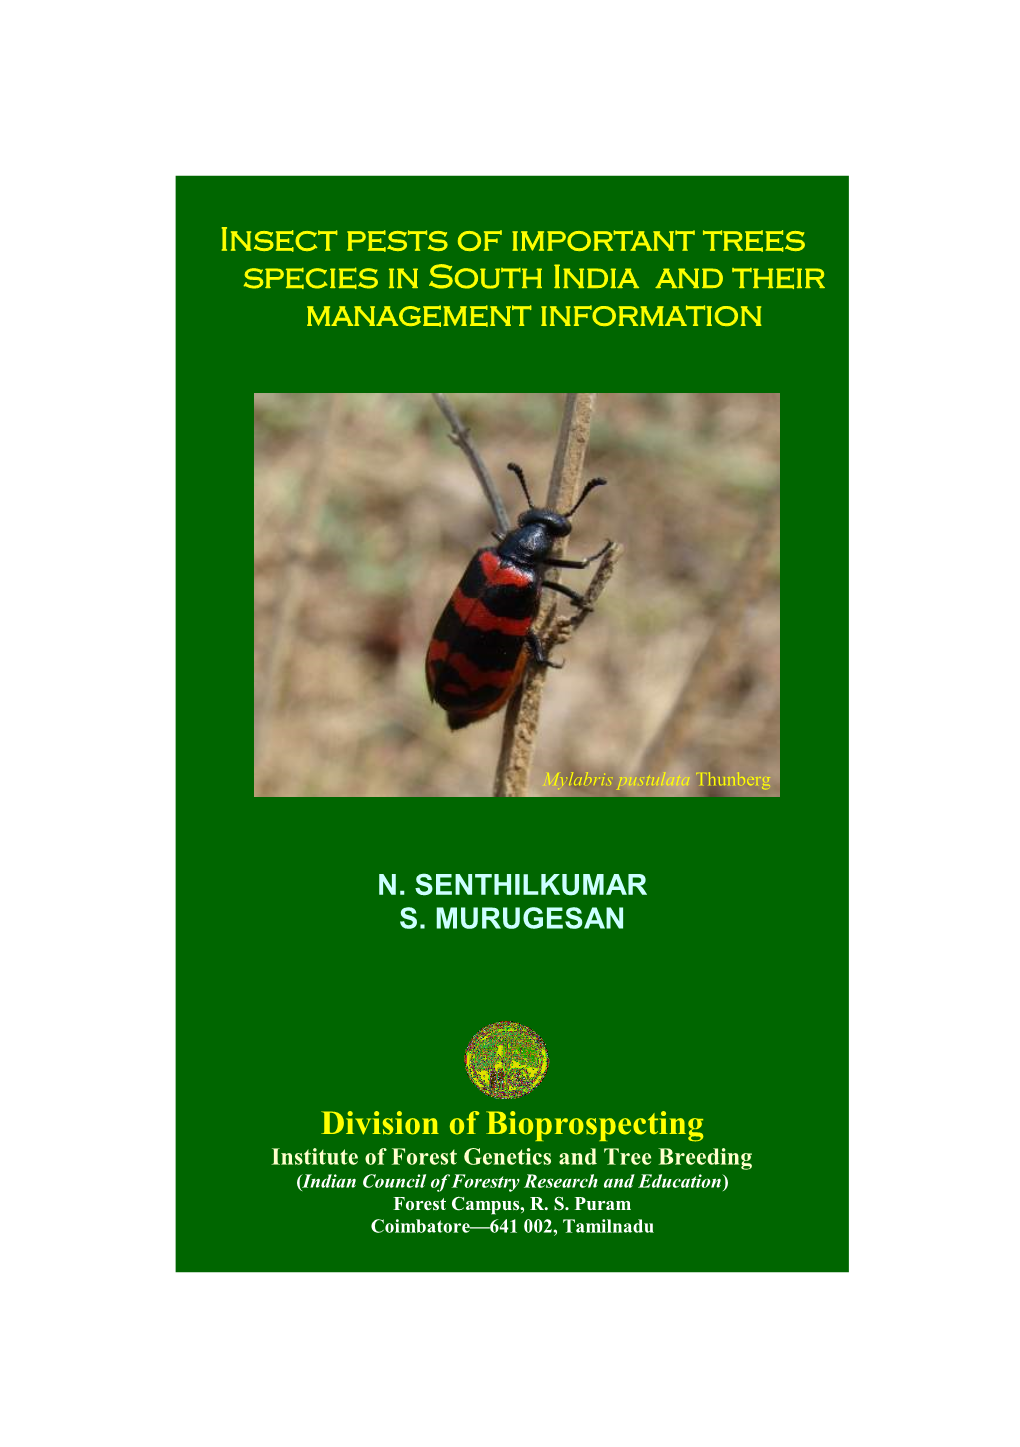 Insect Pests of Important Trees Species in South India and Their Management Information